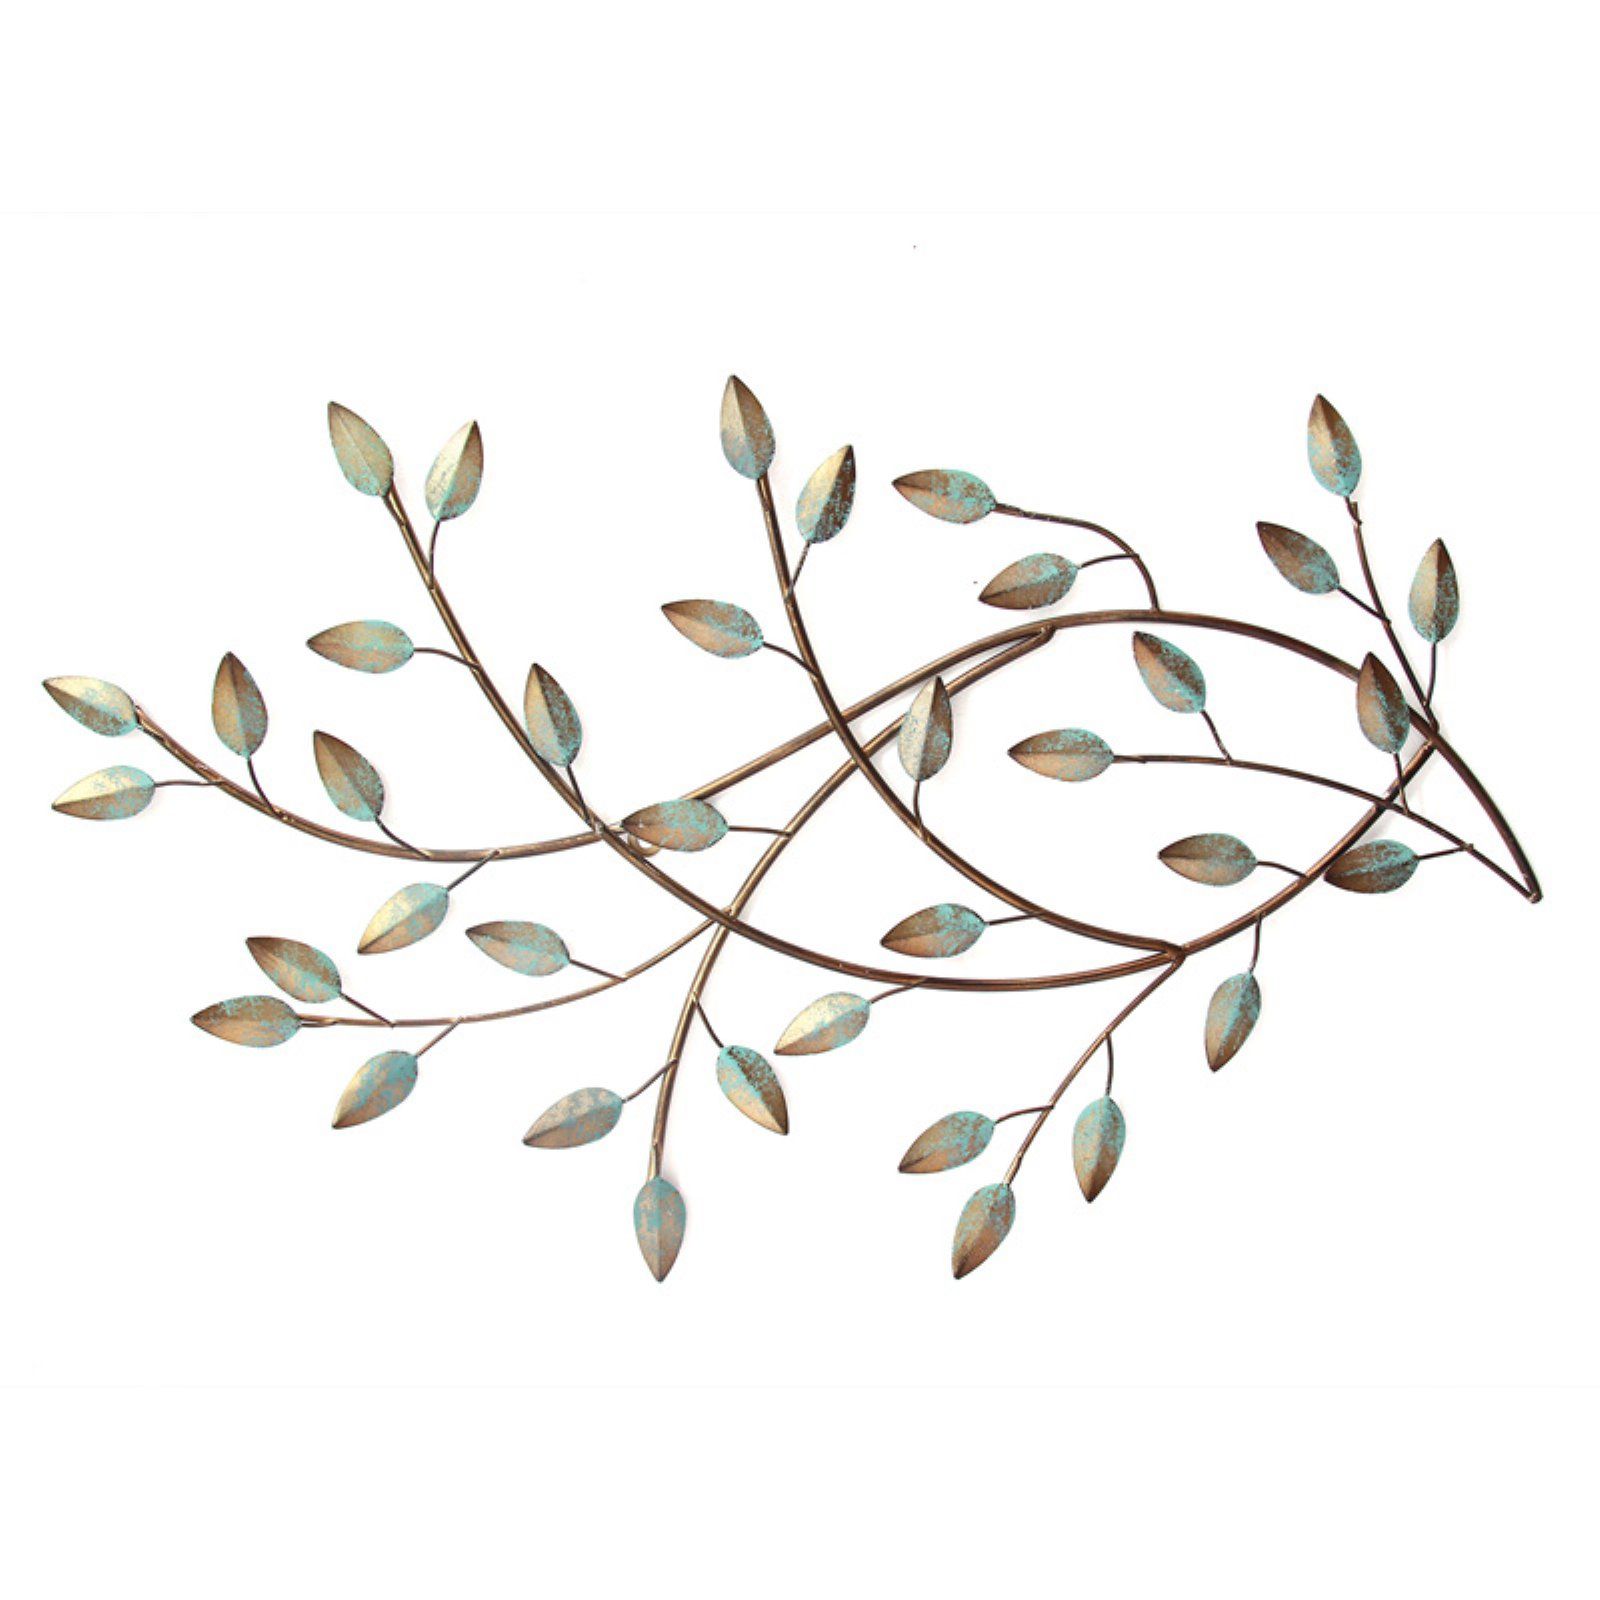 Stratton Home Decor Blowing Leaves Wall Decor | Products In With Windswept Tree Wall Decor By World Menagerie (View 14 of 30)